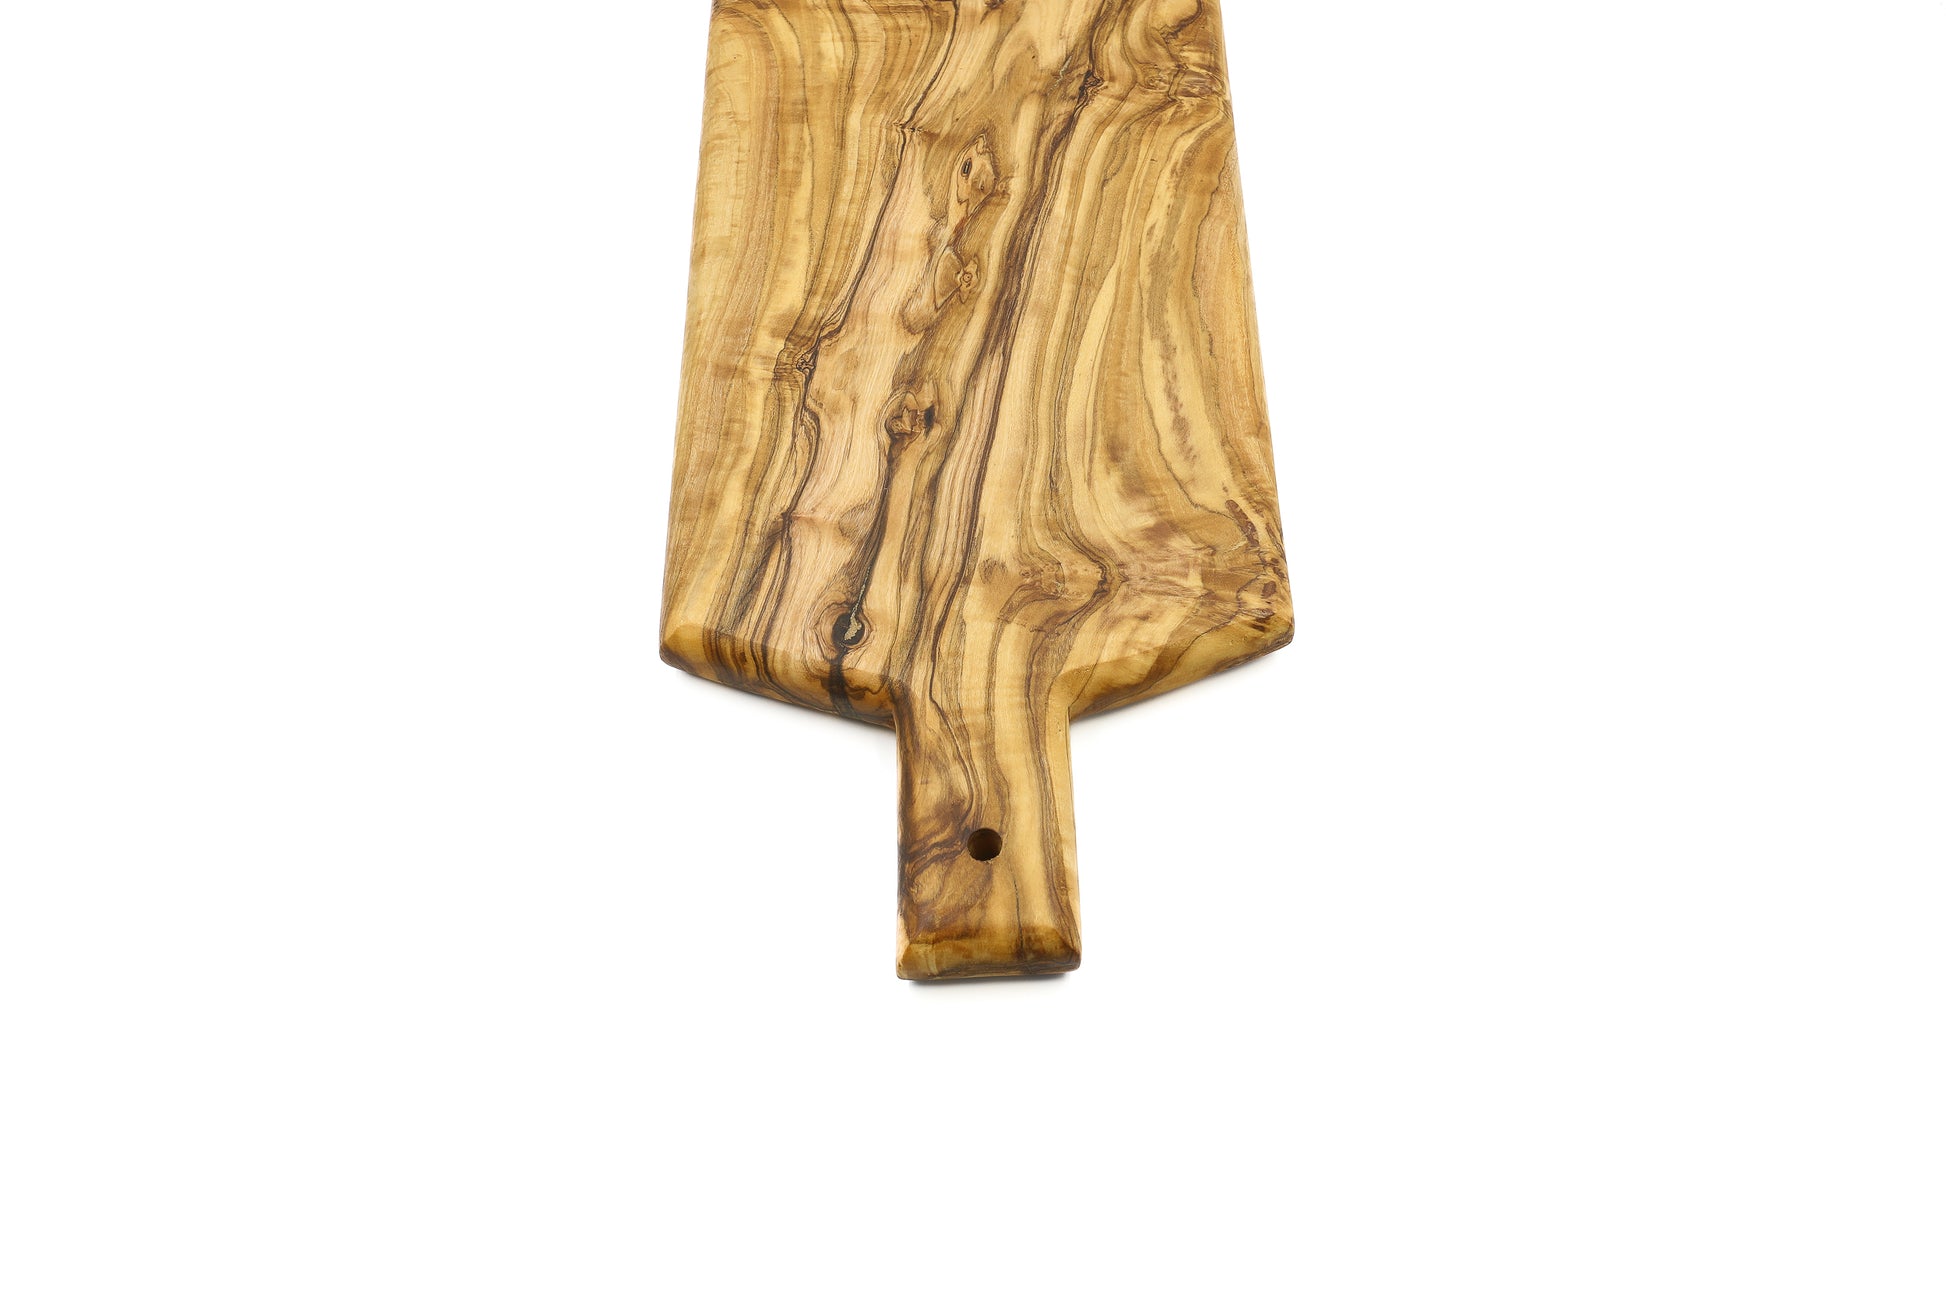 Serving board with a shield design made from olive wood and equipped with a handle